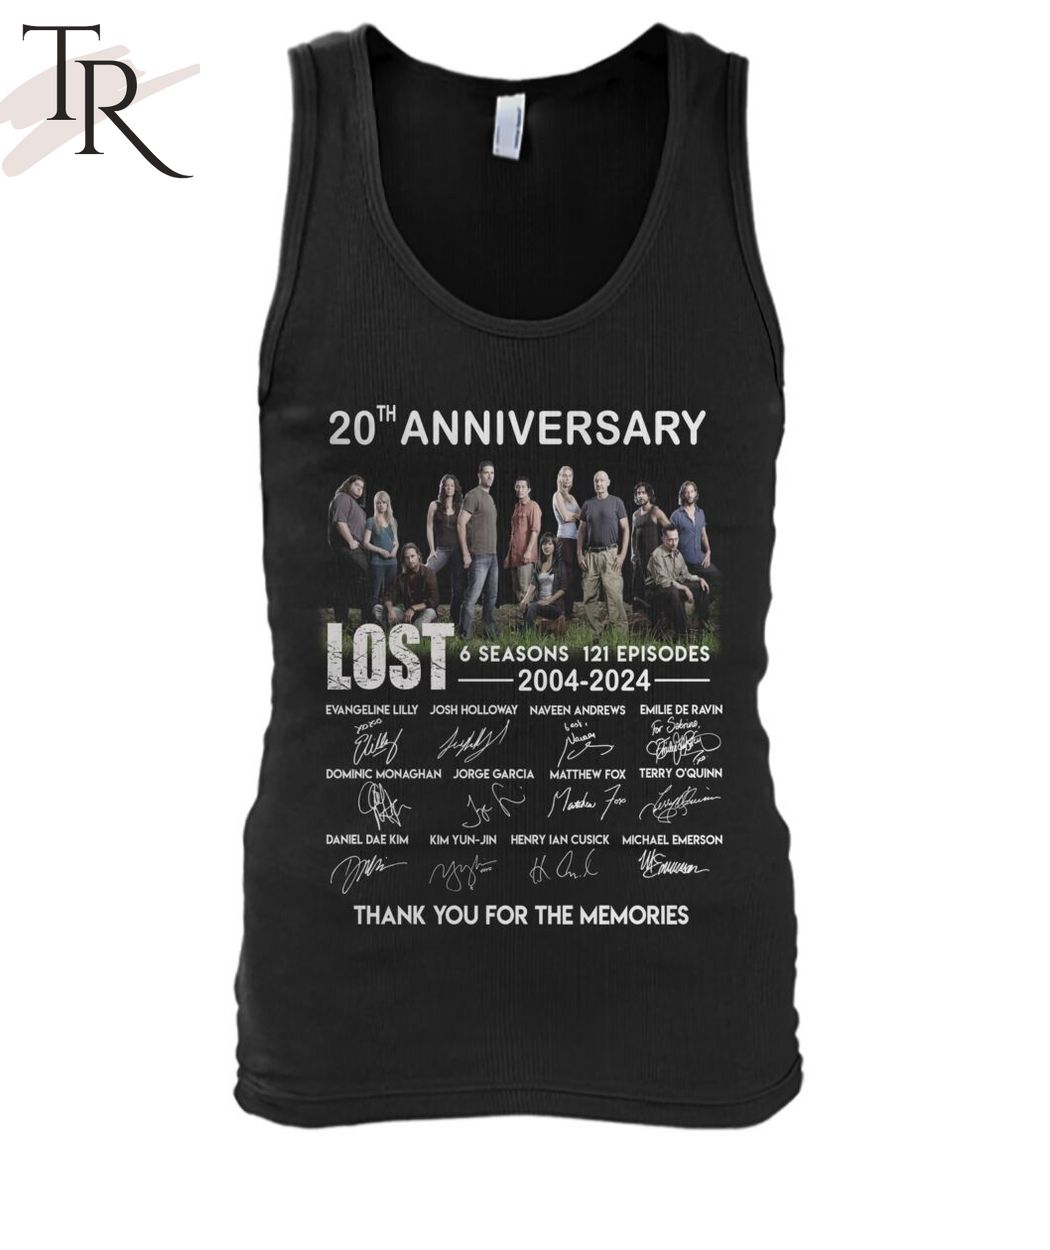 20th Anniversary LOST 6 Seasons 121 Episodes 2004-2024 Thank You For The Memories T-Shirt